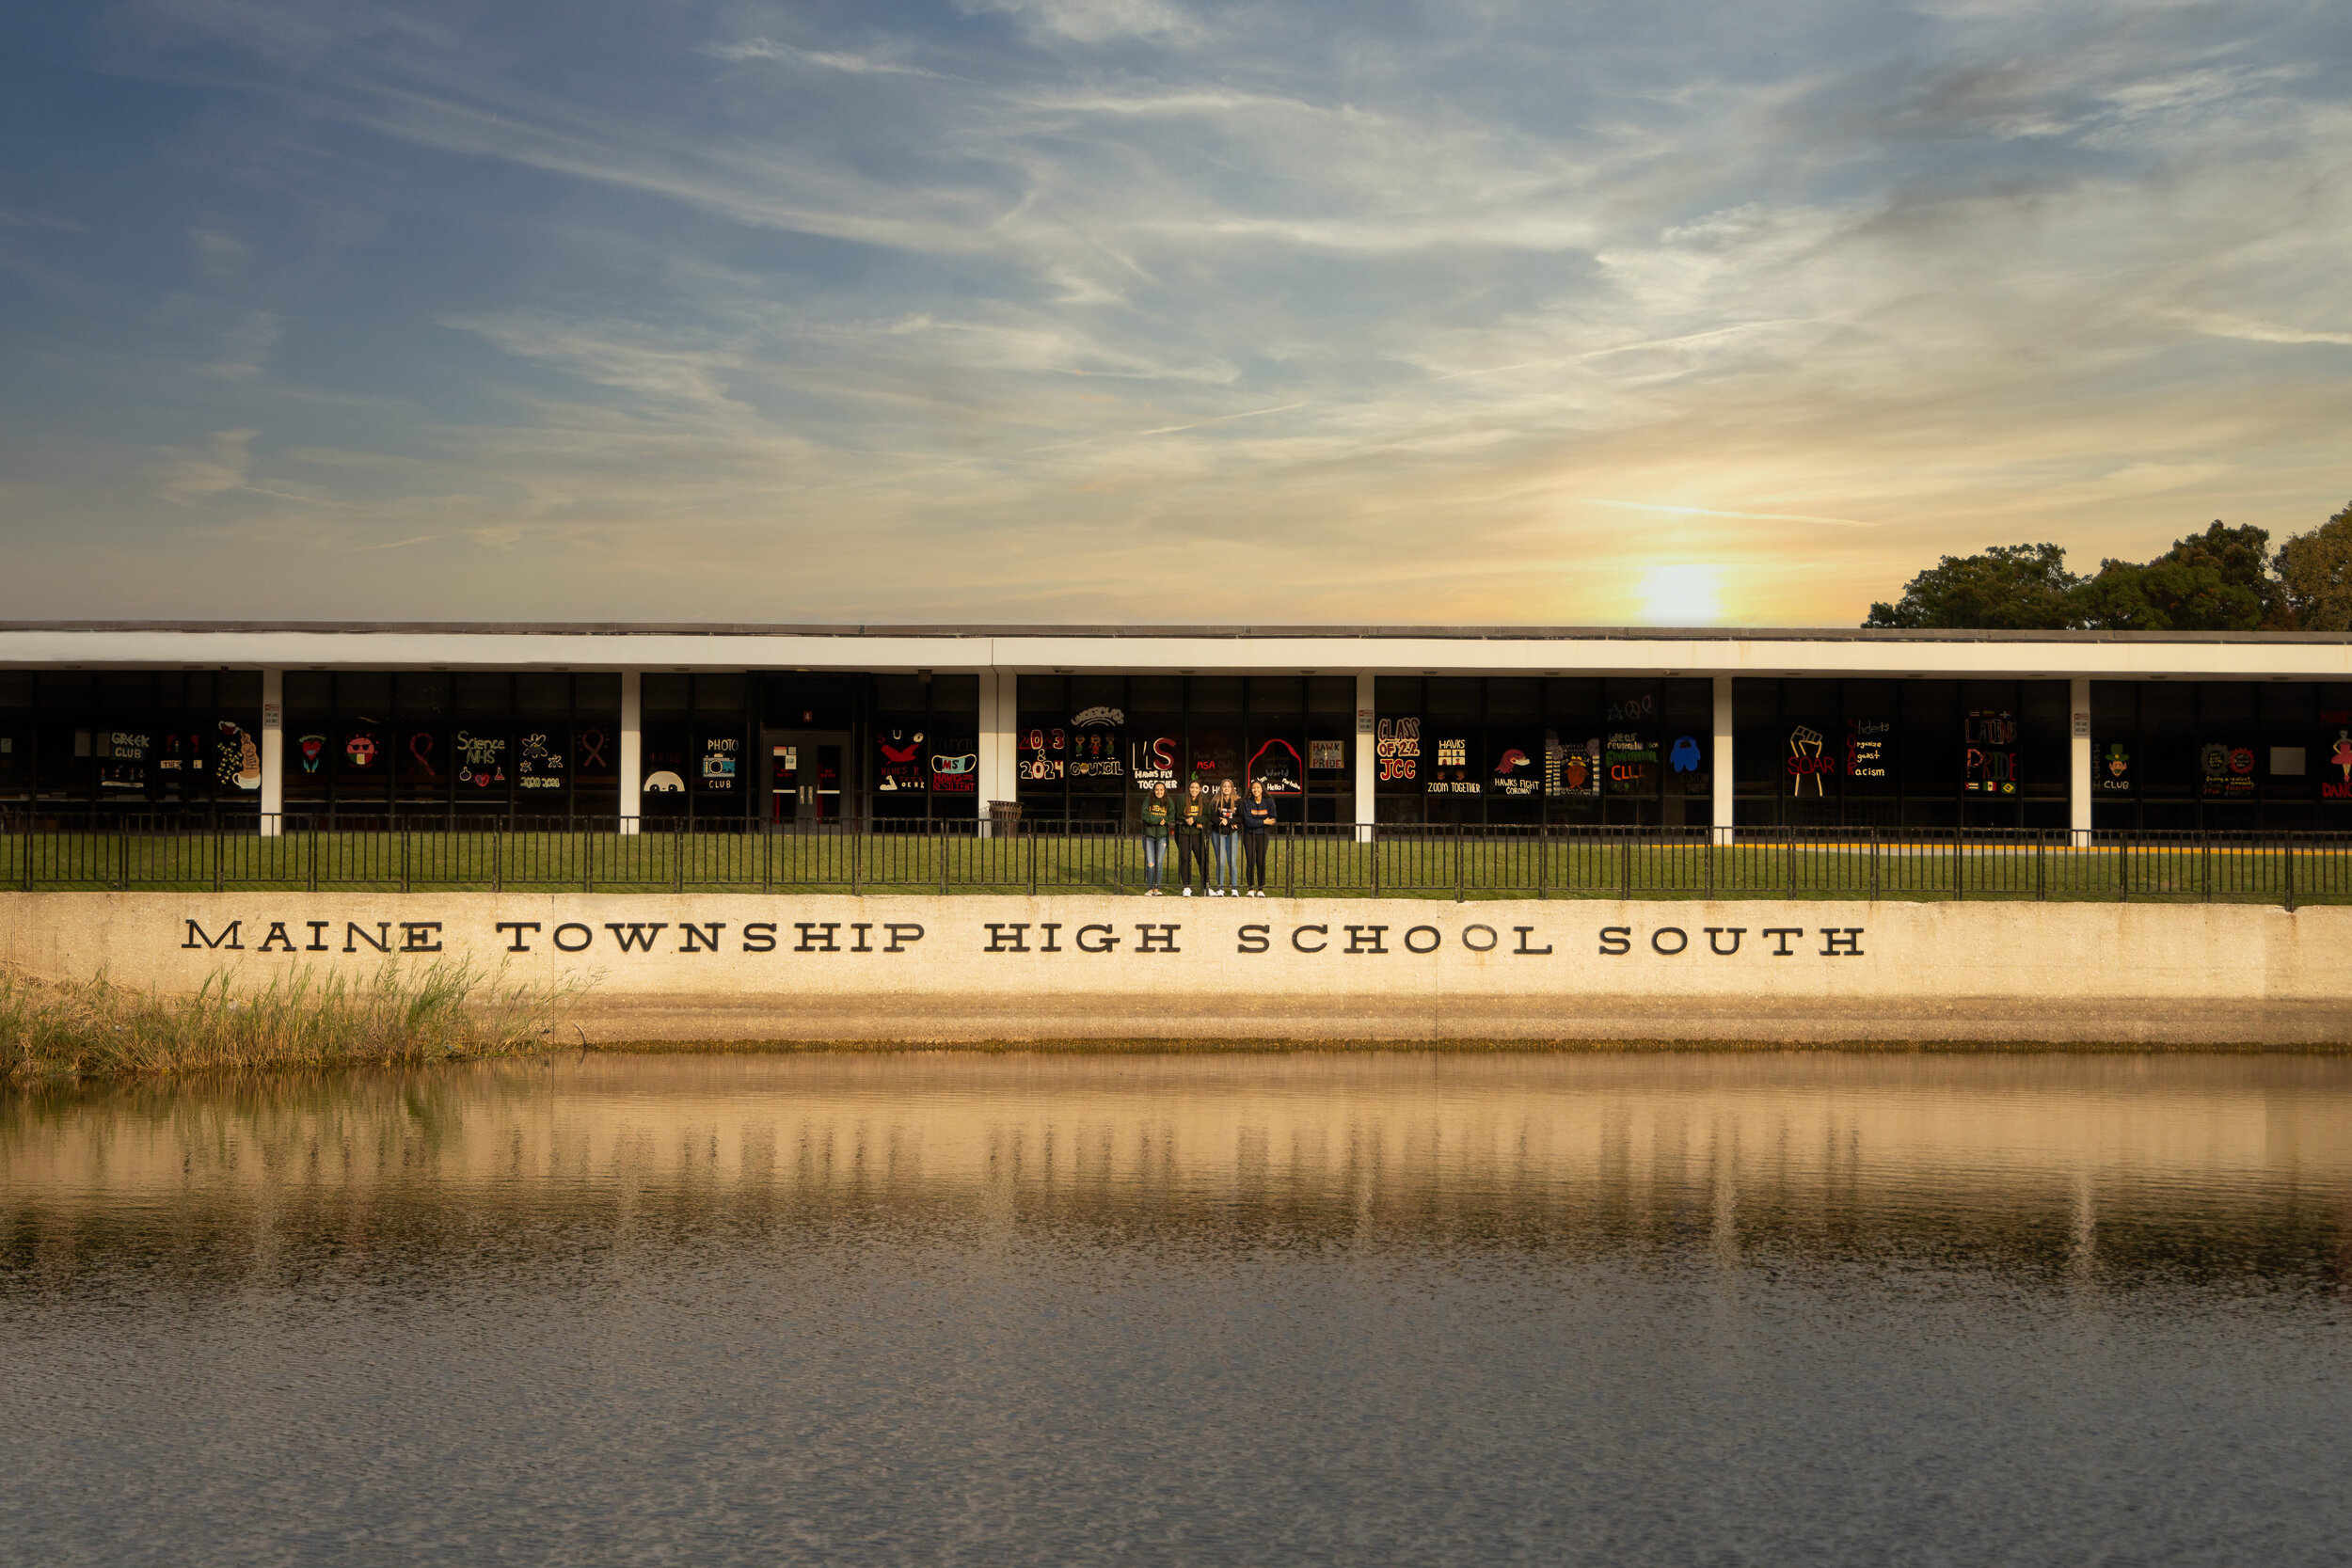 Senior Pictures Chicago Maine South High School at Sunset